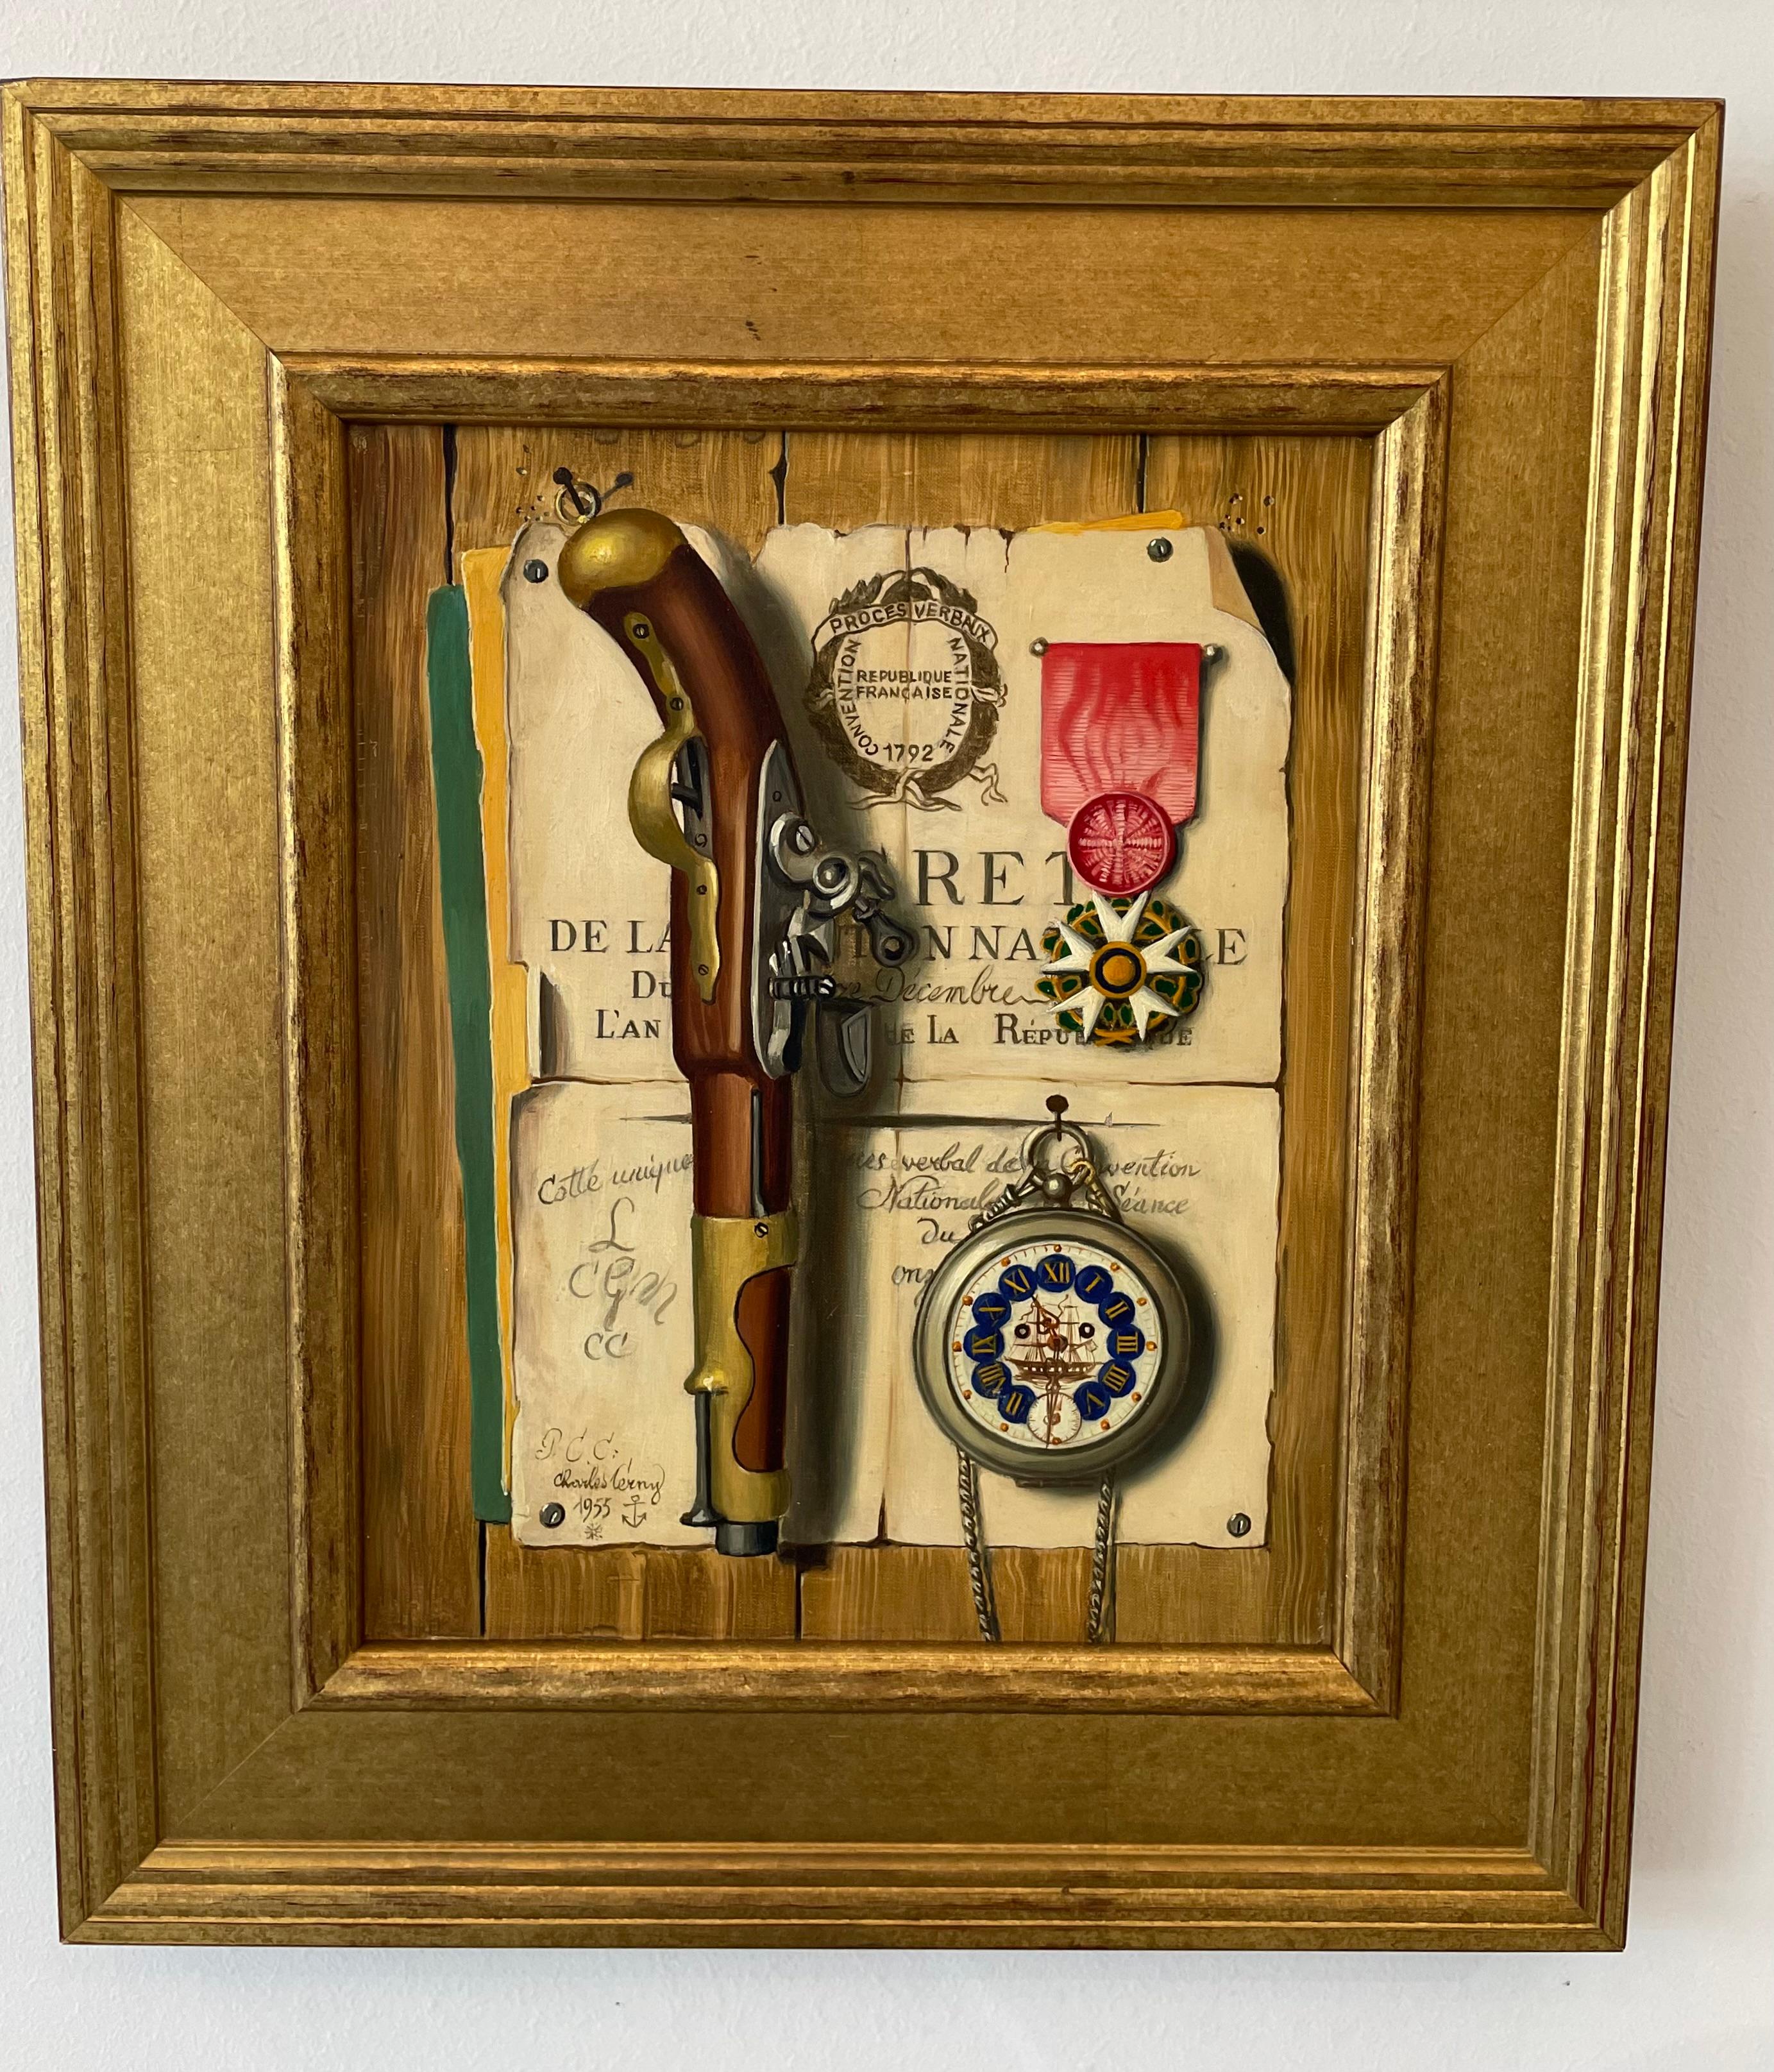 This stylish and chic trompe l'oeil painting on canvas dates to 1955 and was created by the artist Charles Cerny. 

Note: Frame dimensions: 15.75